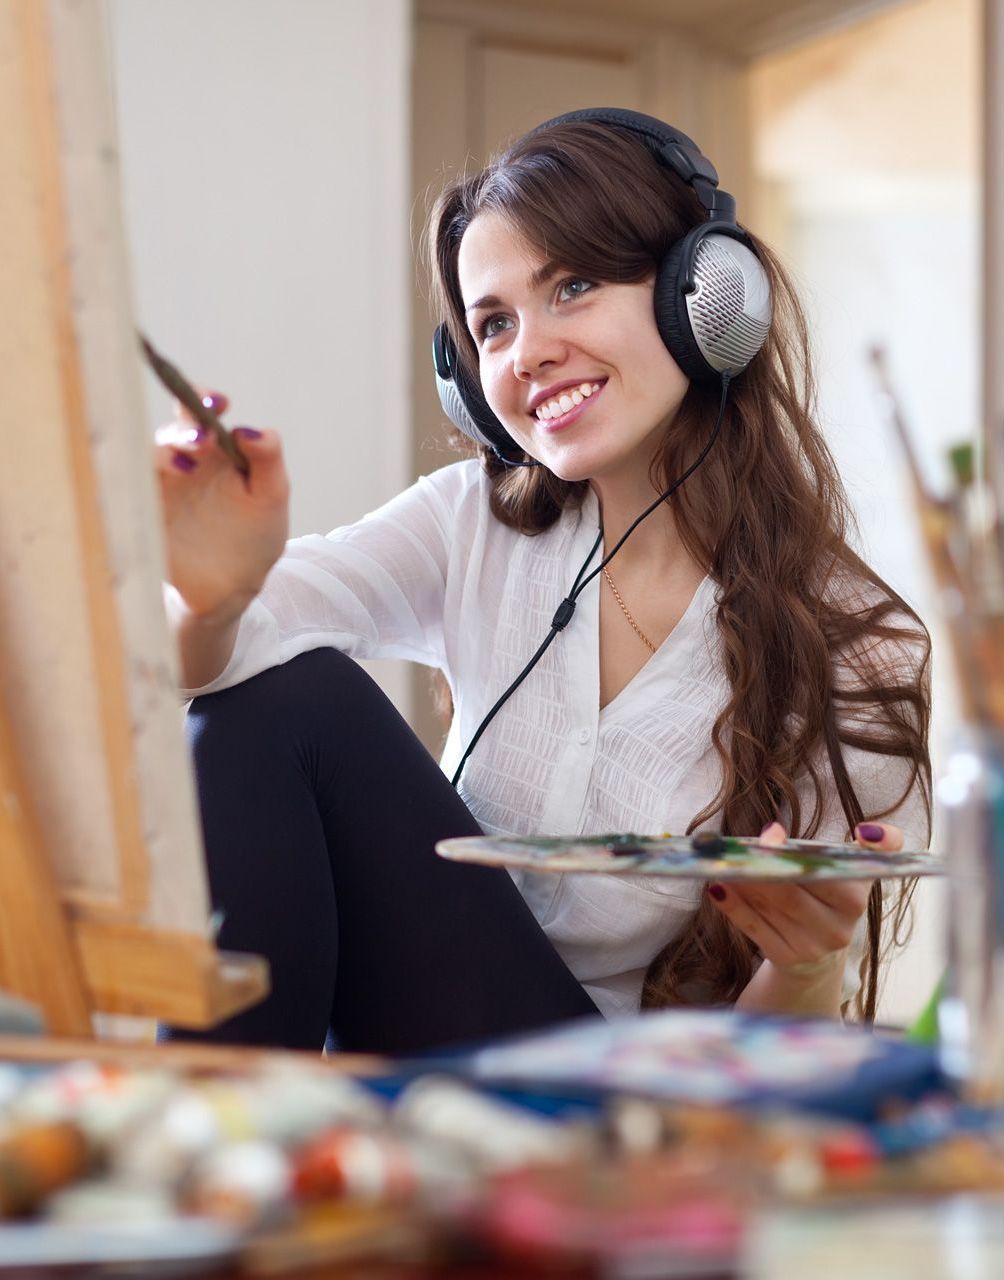 woman painting on canvas with headphones on